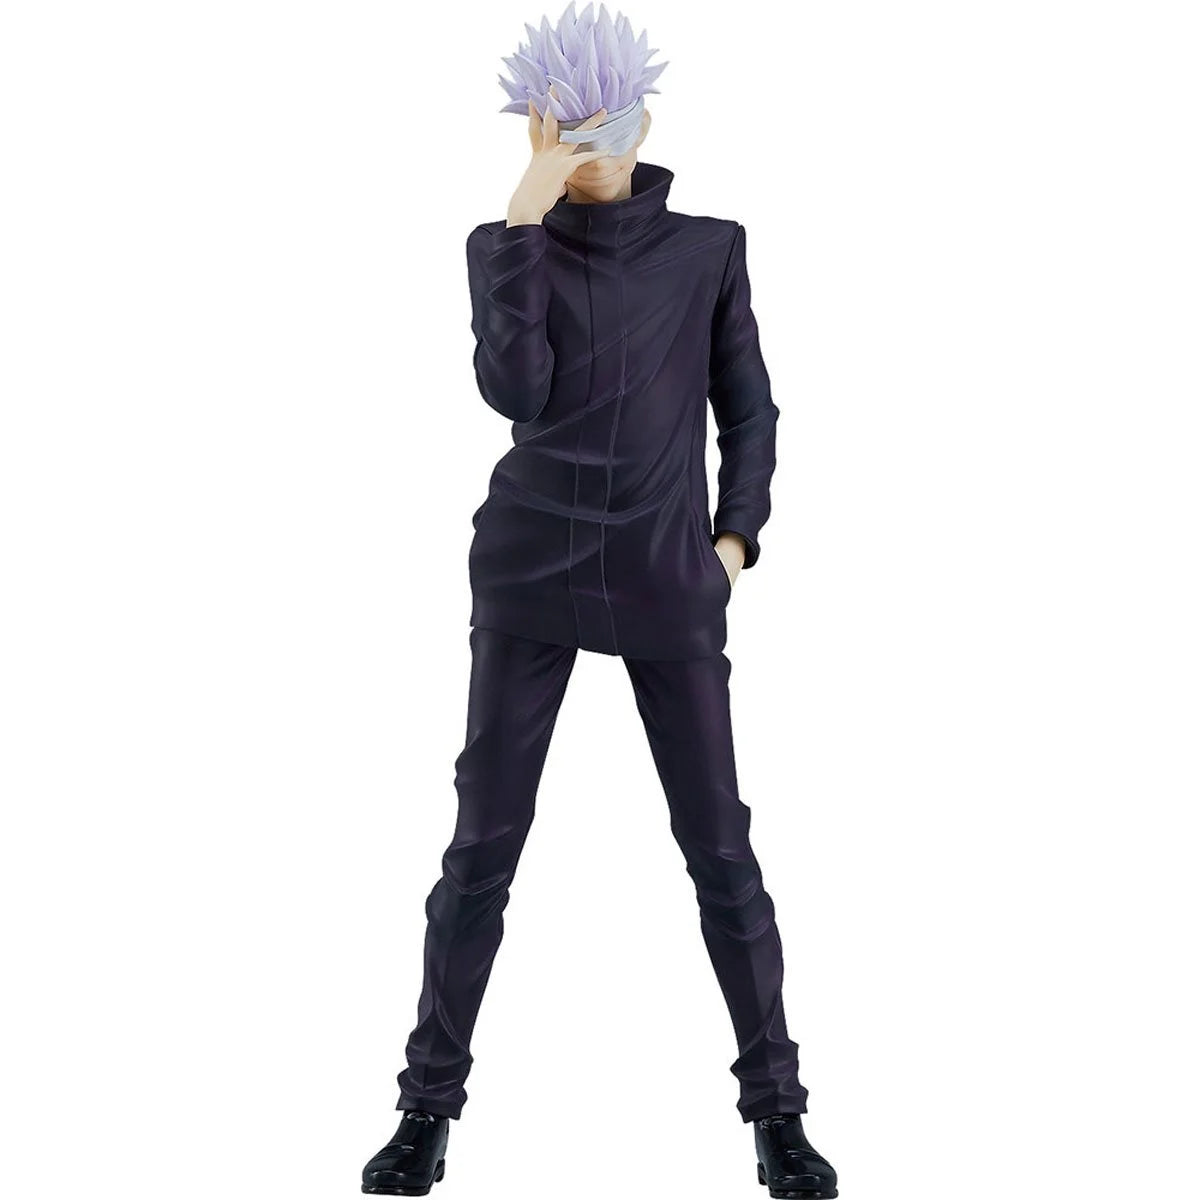 Buy Action Figures Anime Online In India  Etsy India